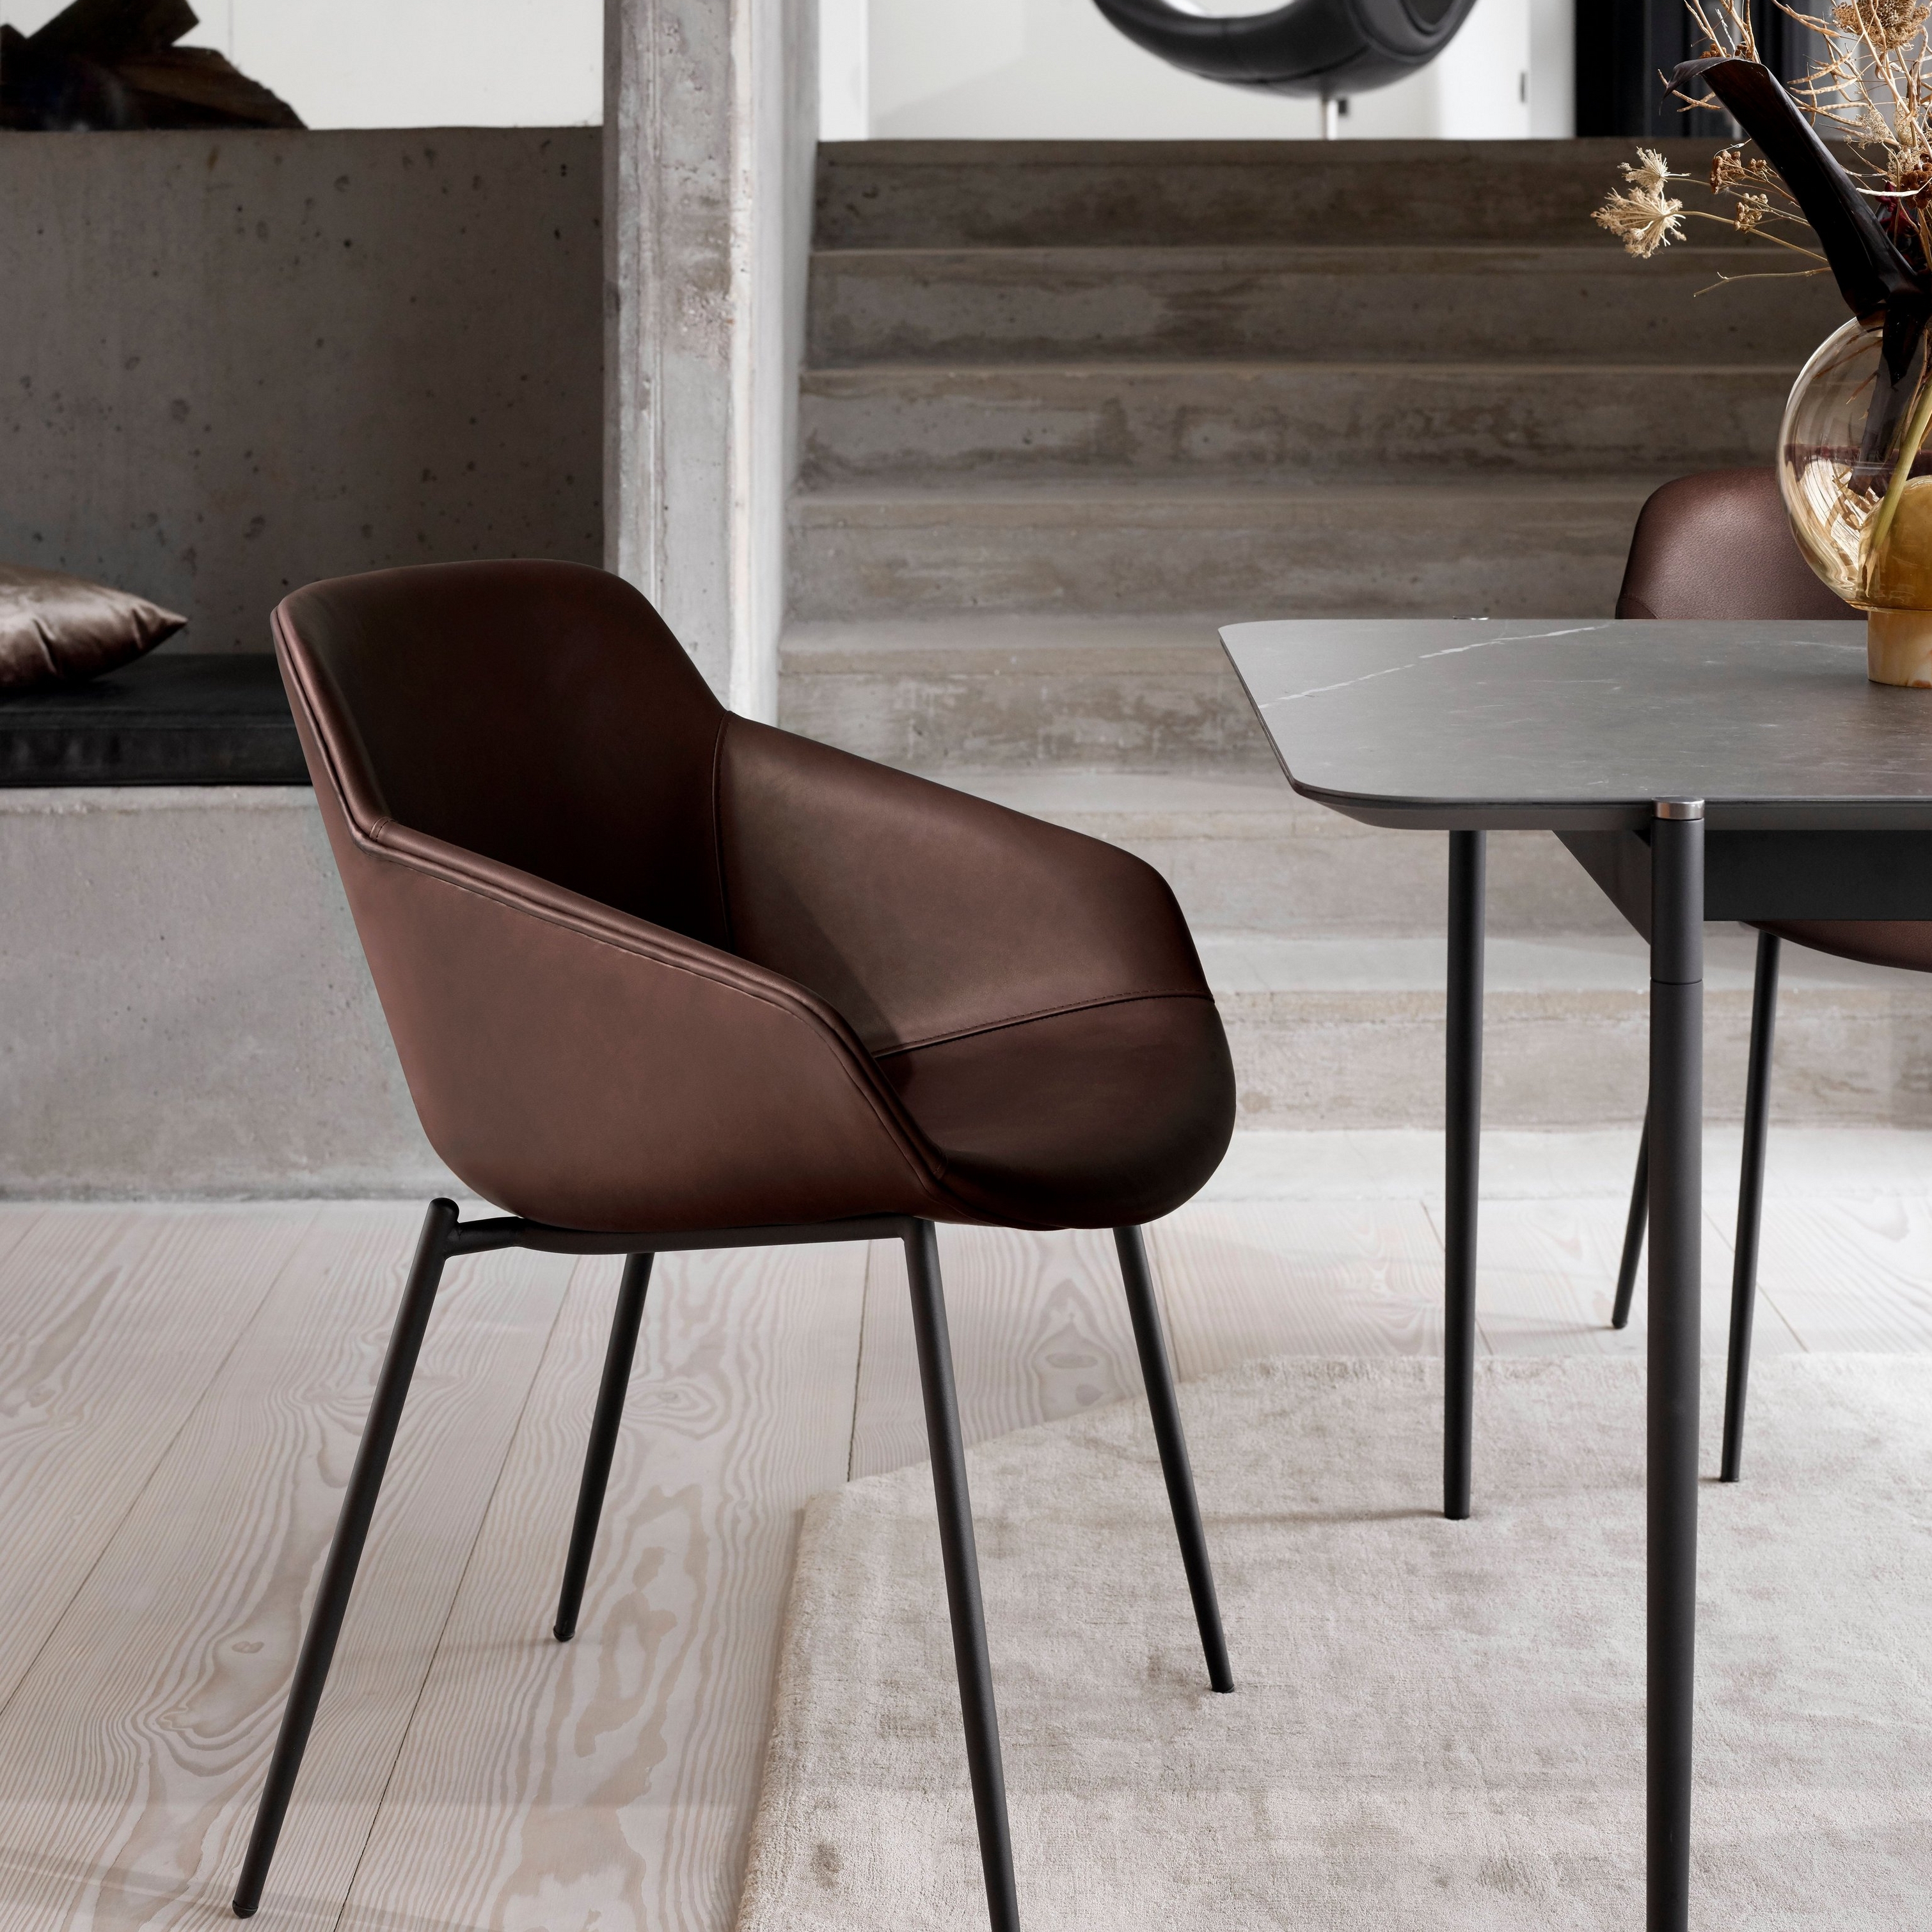 Leather dining chair with black legs, near a table with a vase, in a modern setting.